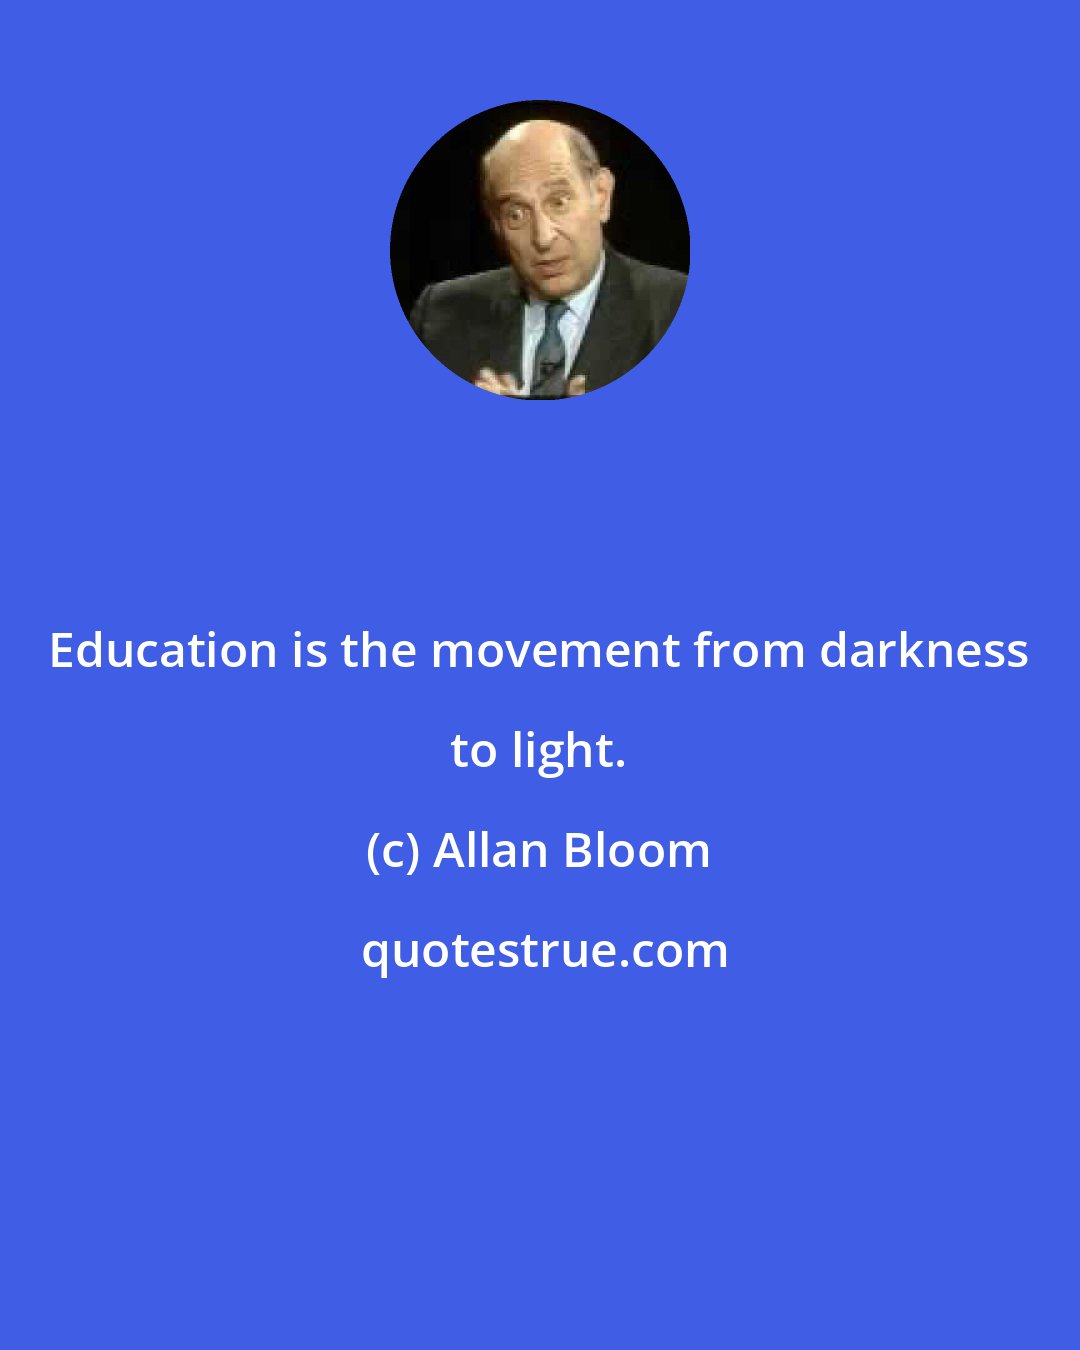 Allan Bloom: Education is the movement from darkness to light.